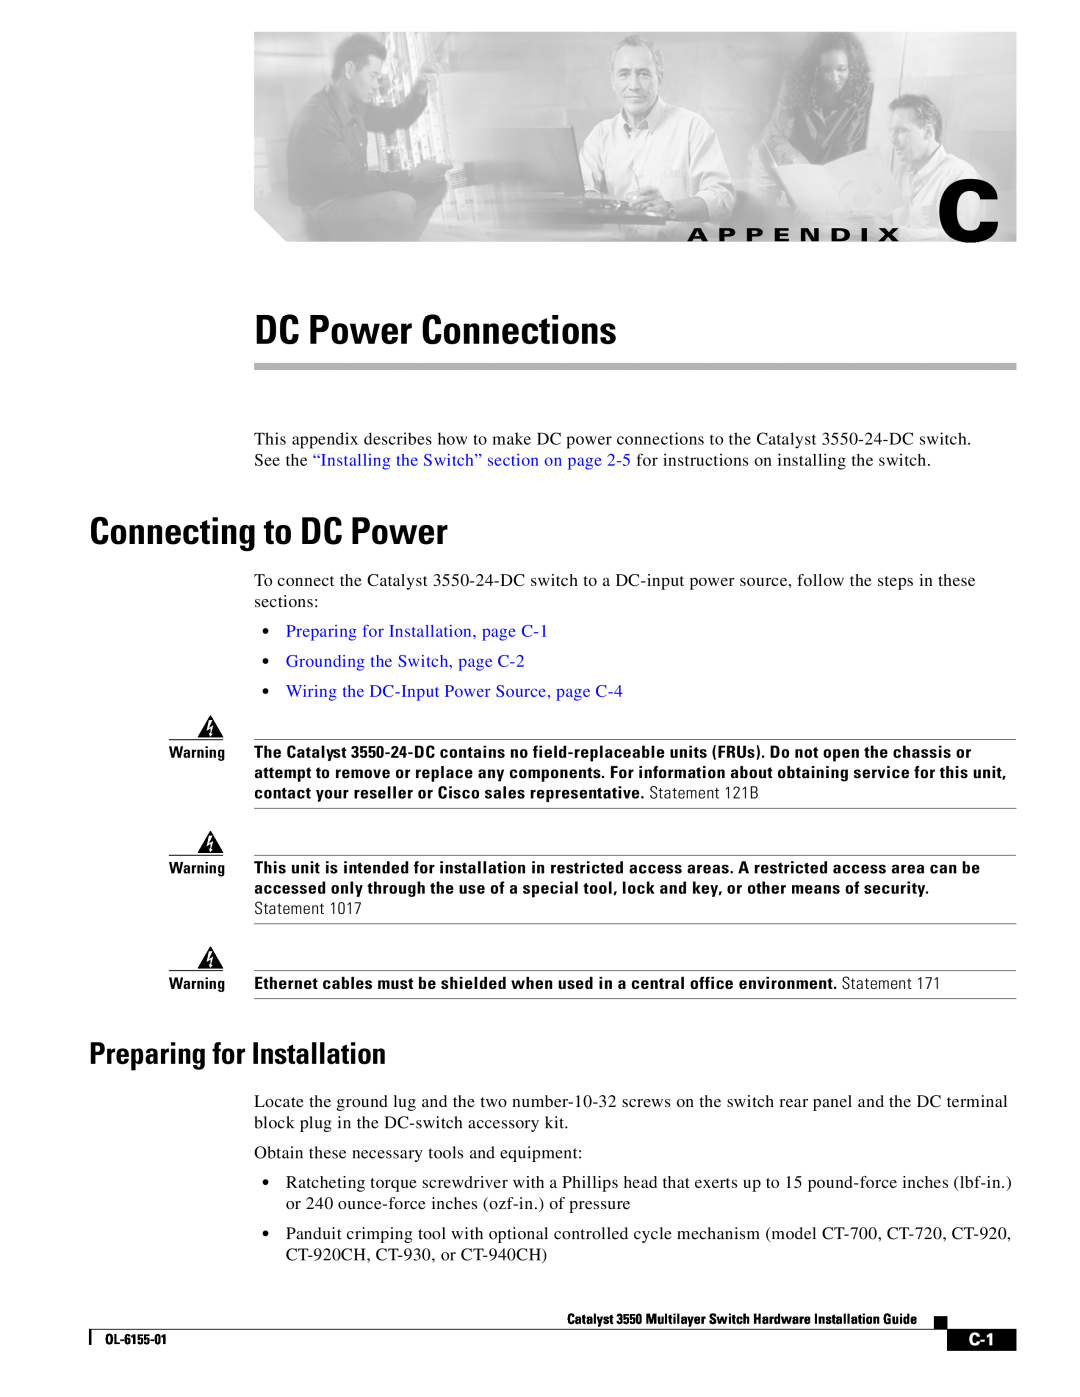 Cisco Systems 3550 manual DC Power Connections, Connecting to DC Power, Preparing for Installation, A P P E N D I X C 